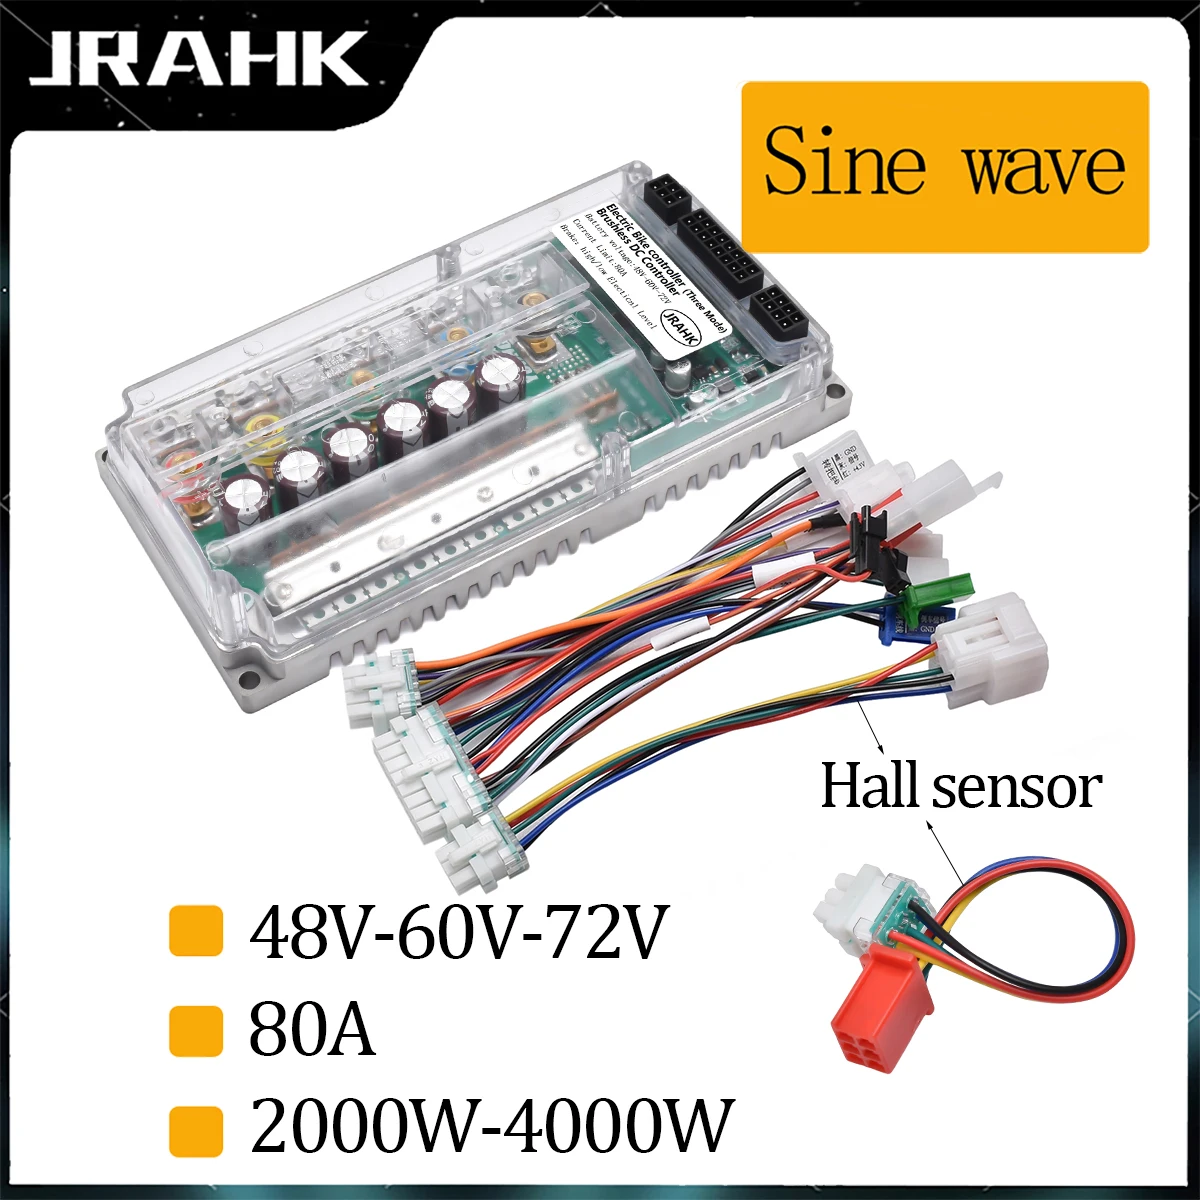 

JRAHK BLDC 72V 3000W Electric Motorcycle Controller E-bike 2000W-4000W 48V 60V 72V For Electric Snow Scooter Accessories